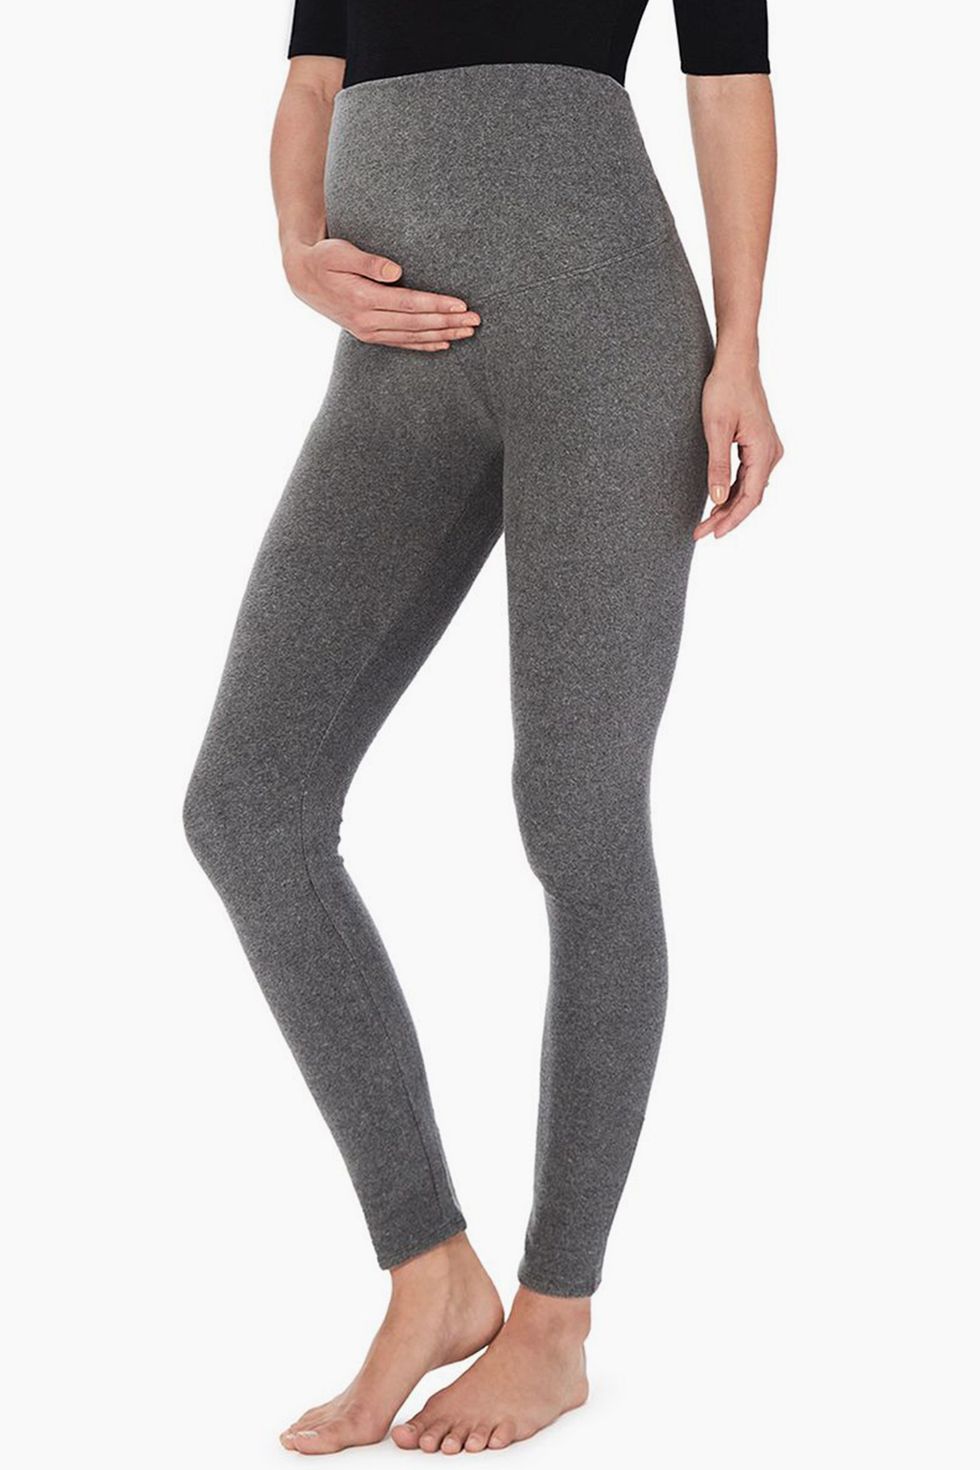 HATCH Maternity The Ultimate Before, During & After Legging, Grey